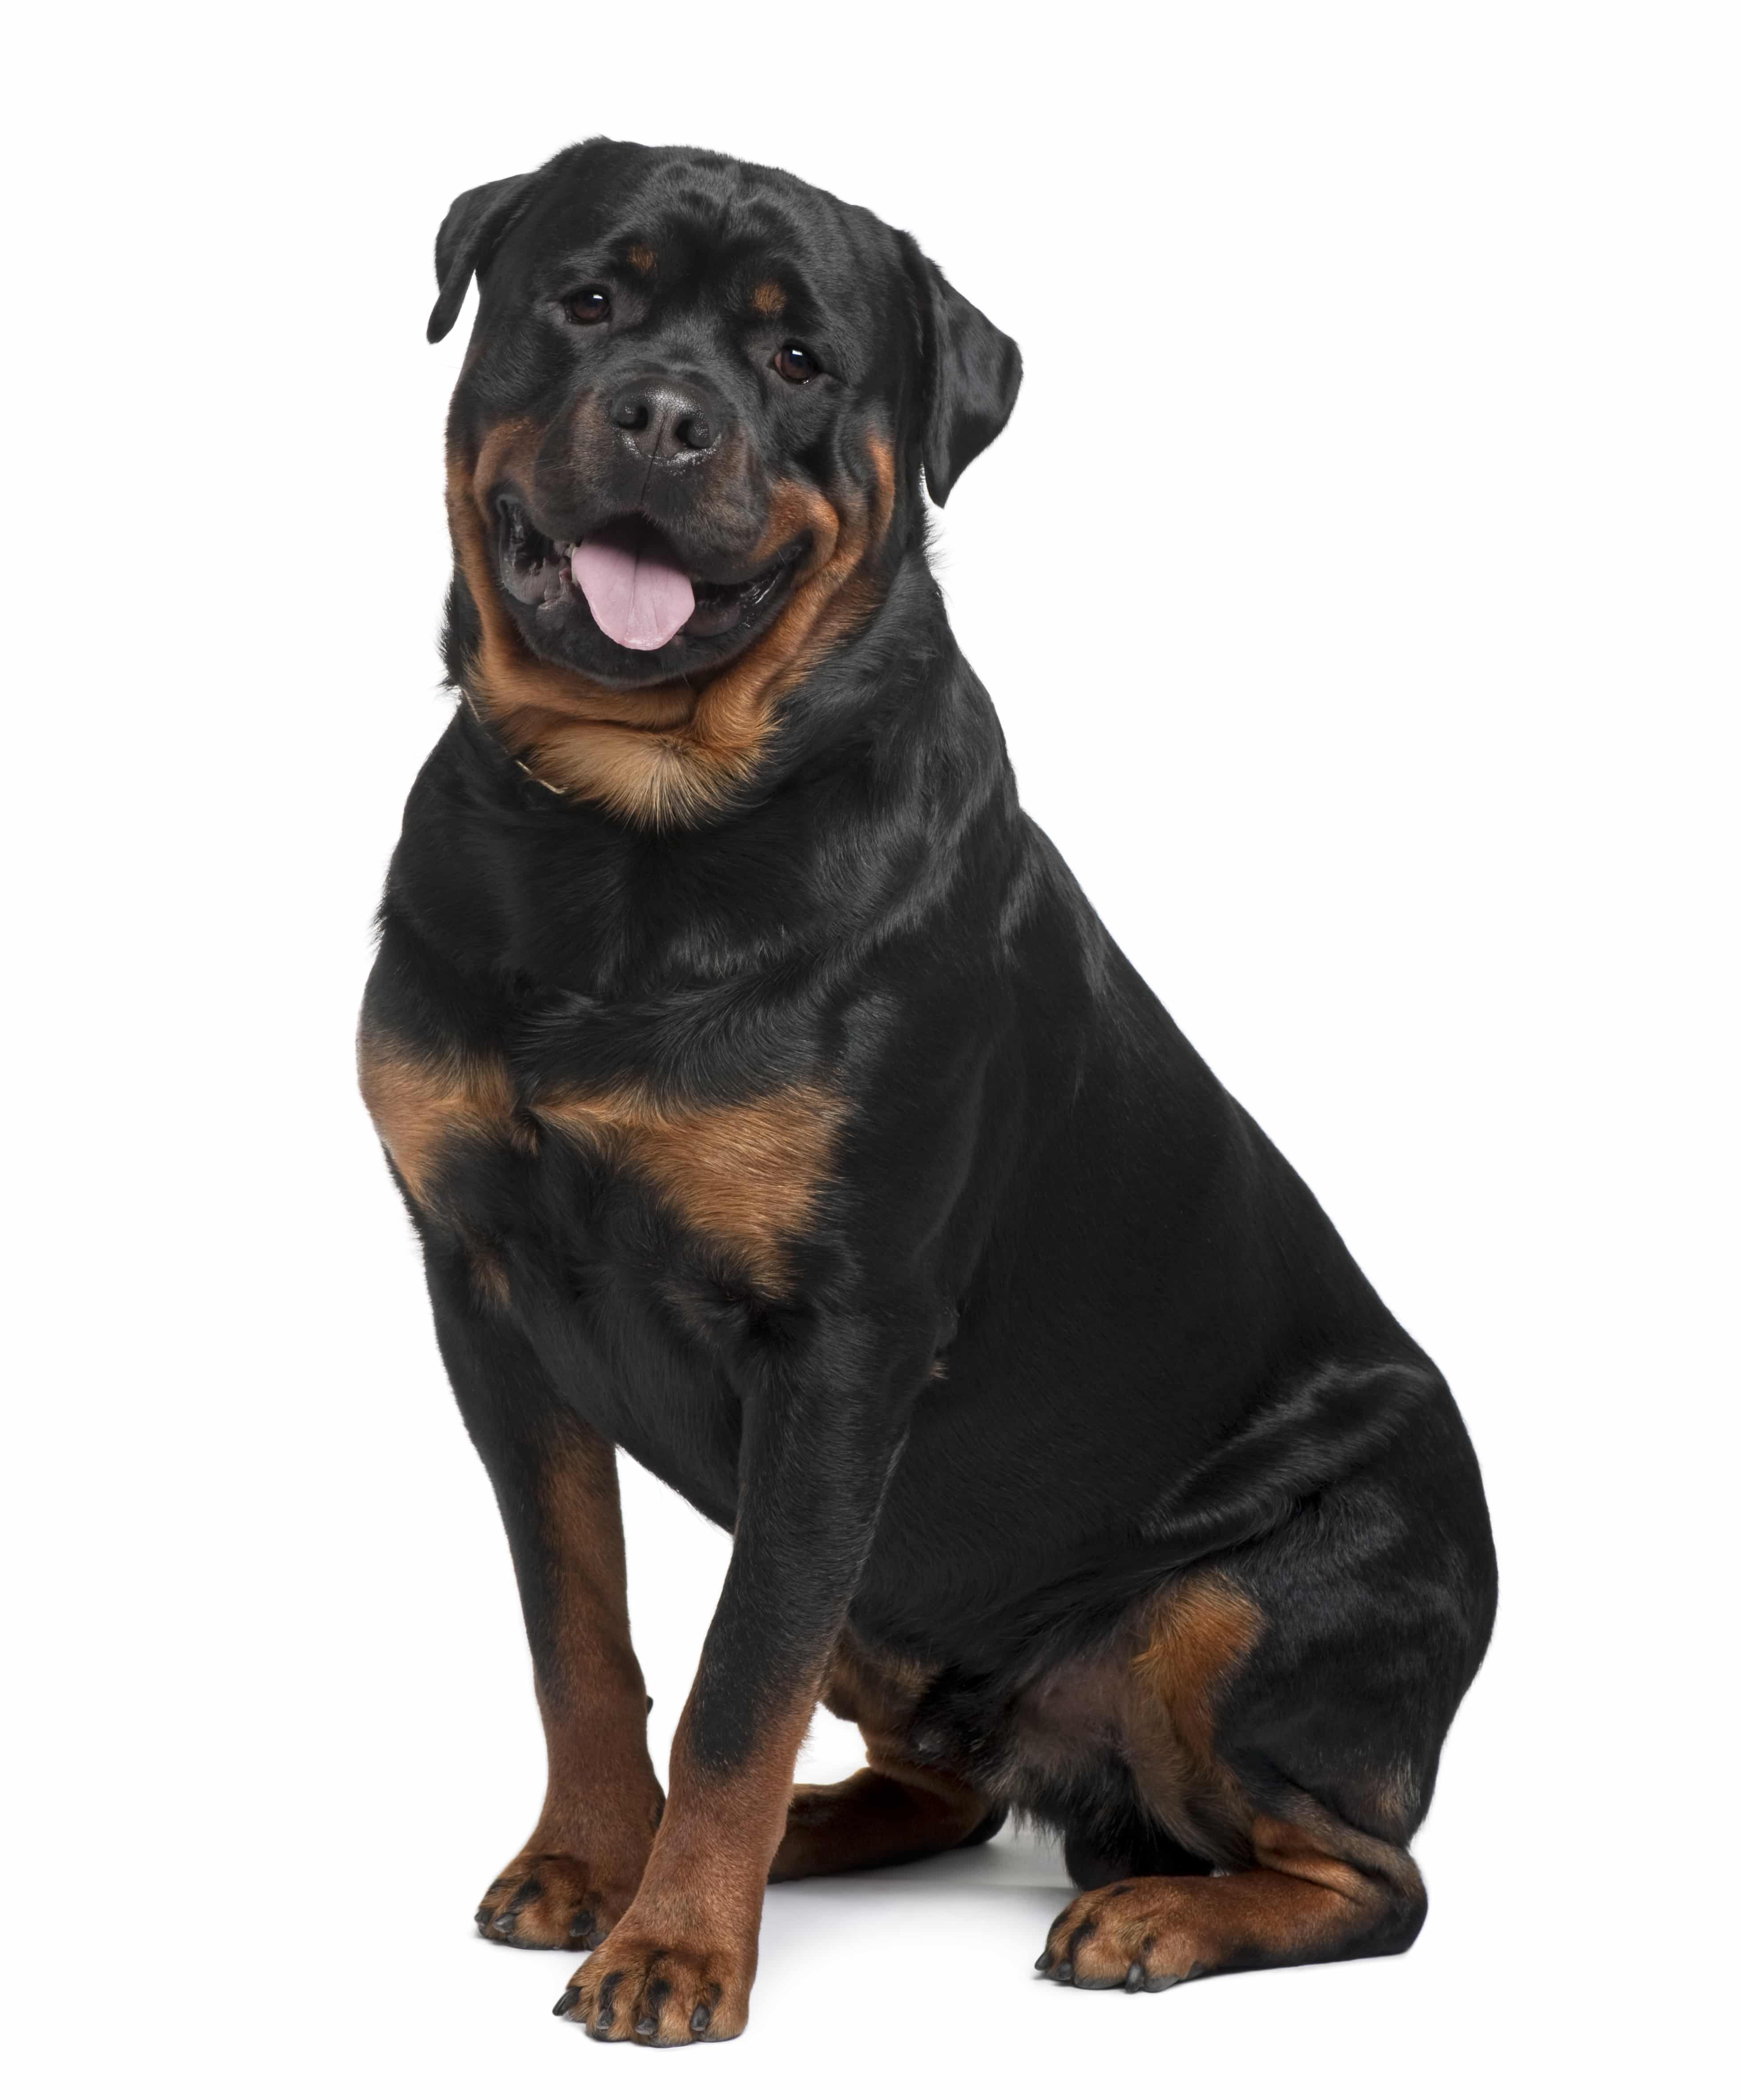 Rottweiler, 2 years old, sitting in front of white background